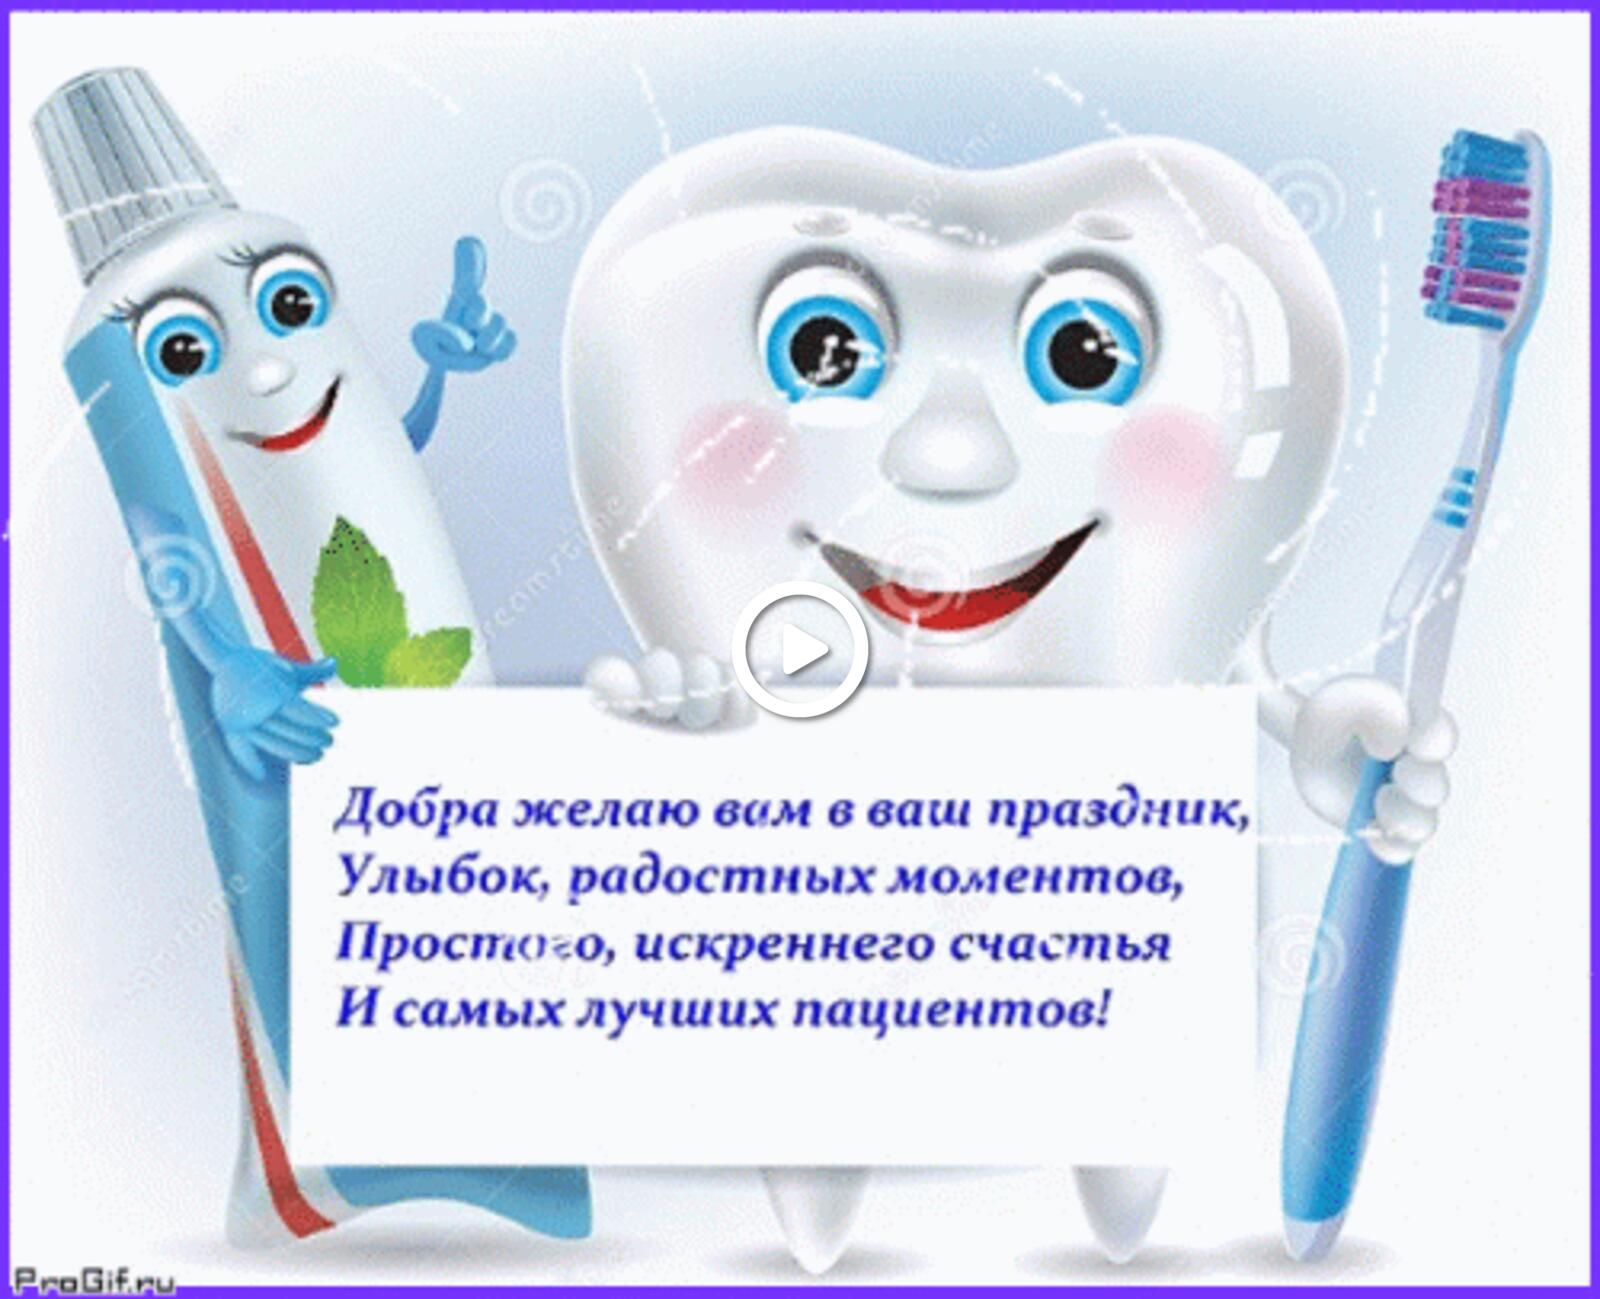 A postcard on the subject of teeth toothbrush text for free